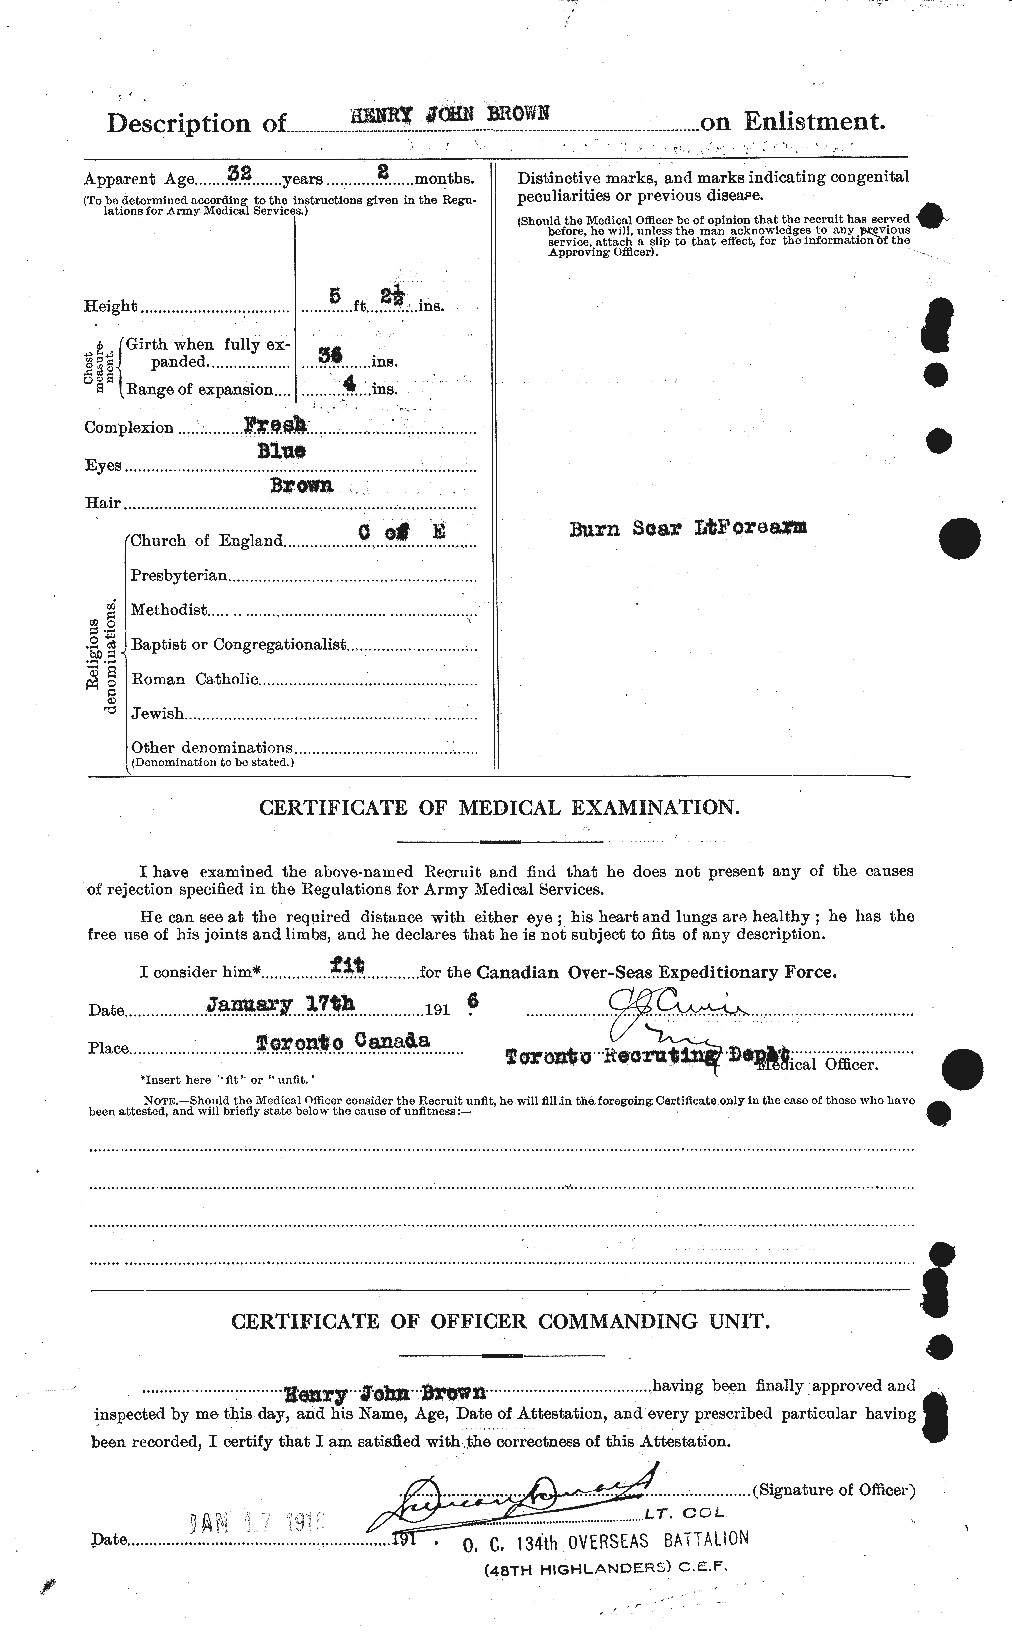 Personnel Records of the First World War - CEF 265530b